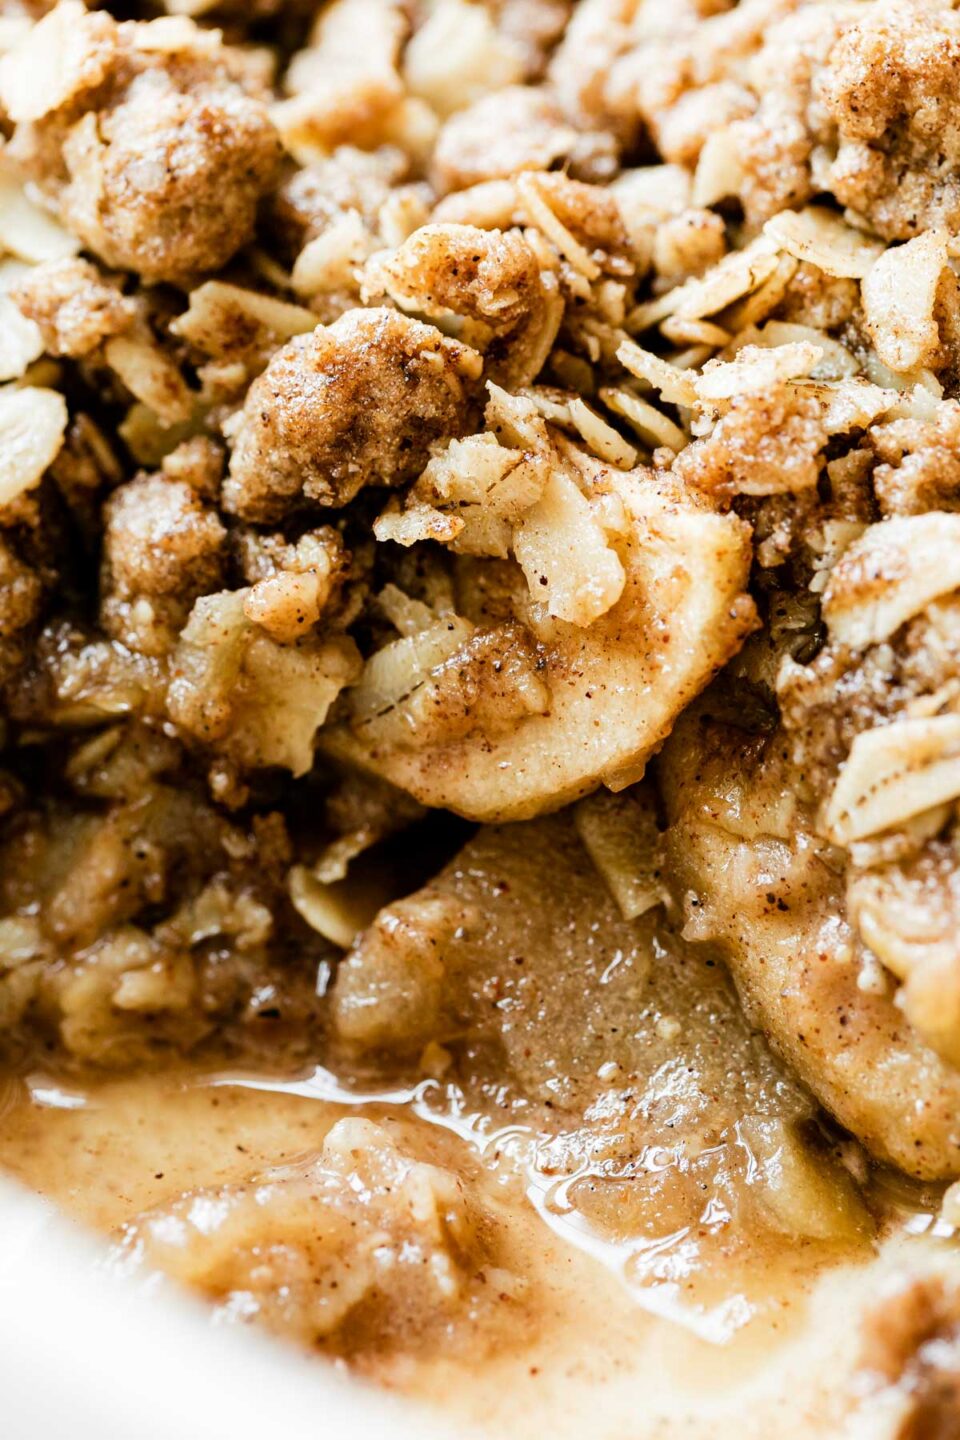 A close up and macro shot of spiced chai apple crisp inside of a white baking dish. A portion of the crisp has been scooped out revealing the layers of warm soft apples and browned chai spice crumble topping.